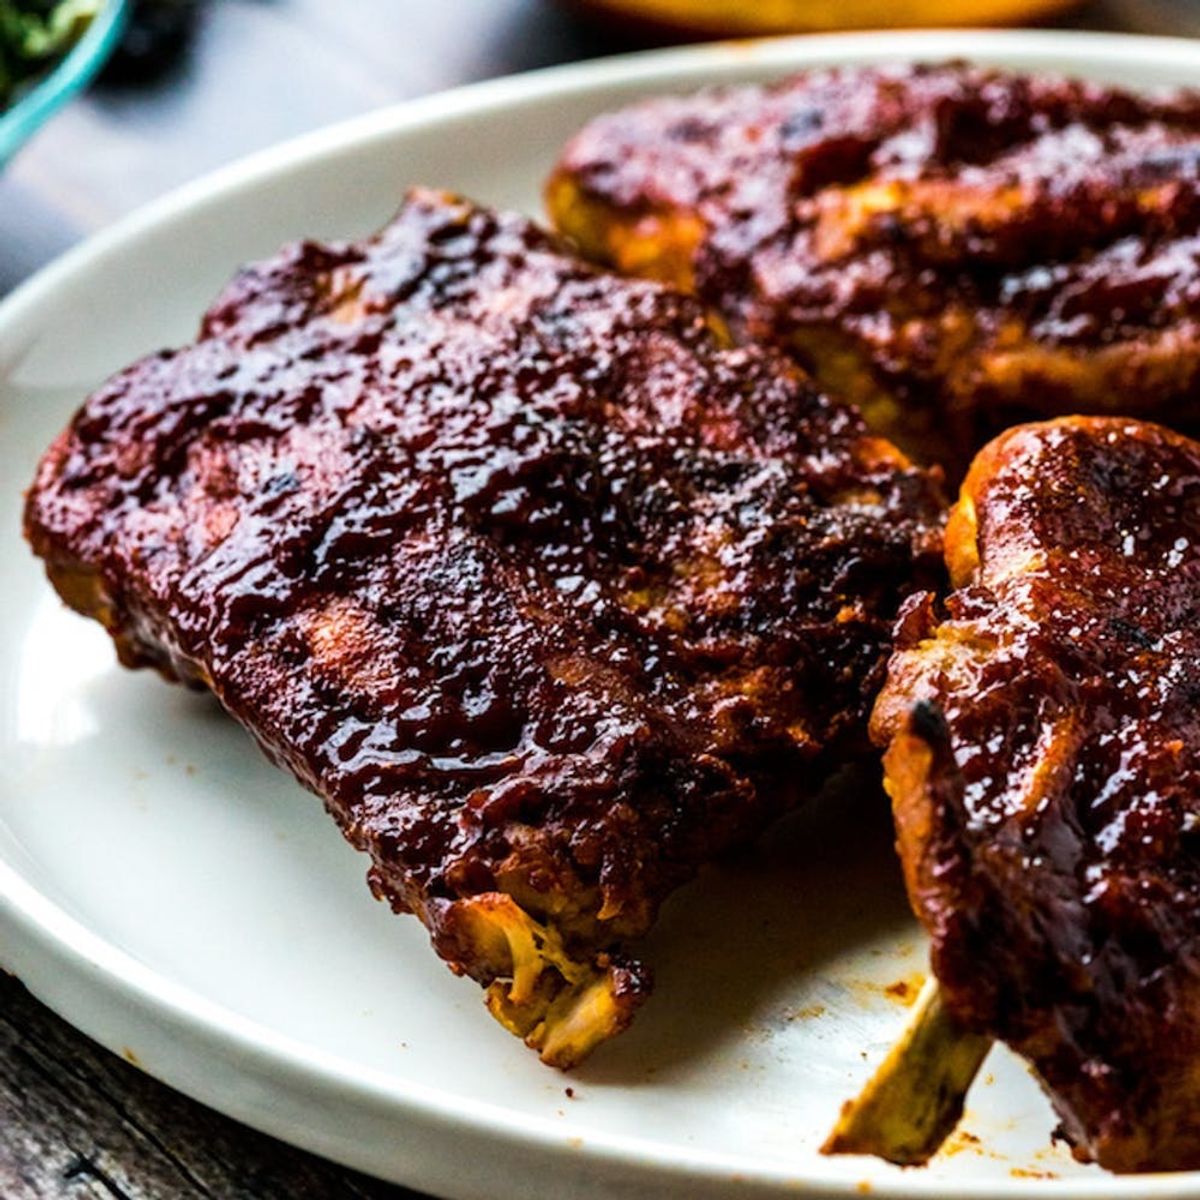 6 Do’s and 2 Don’ts of Cooking Ribs